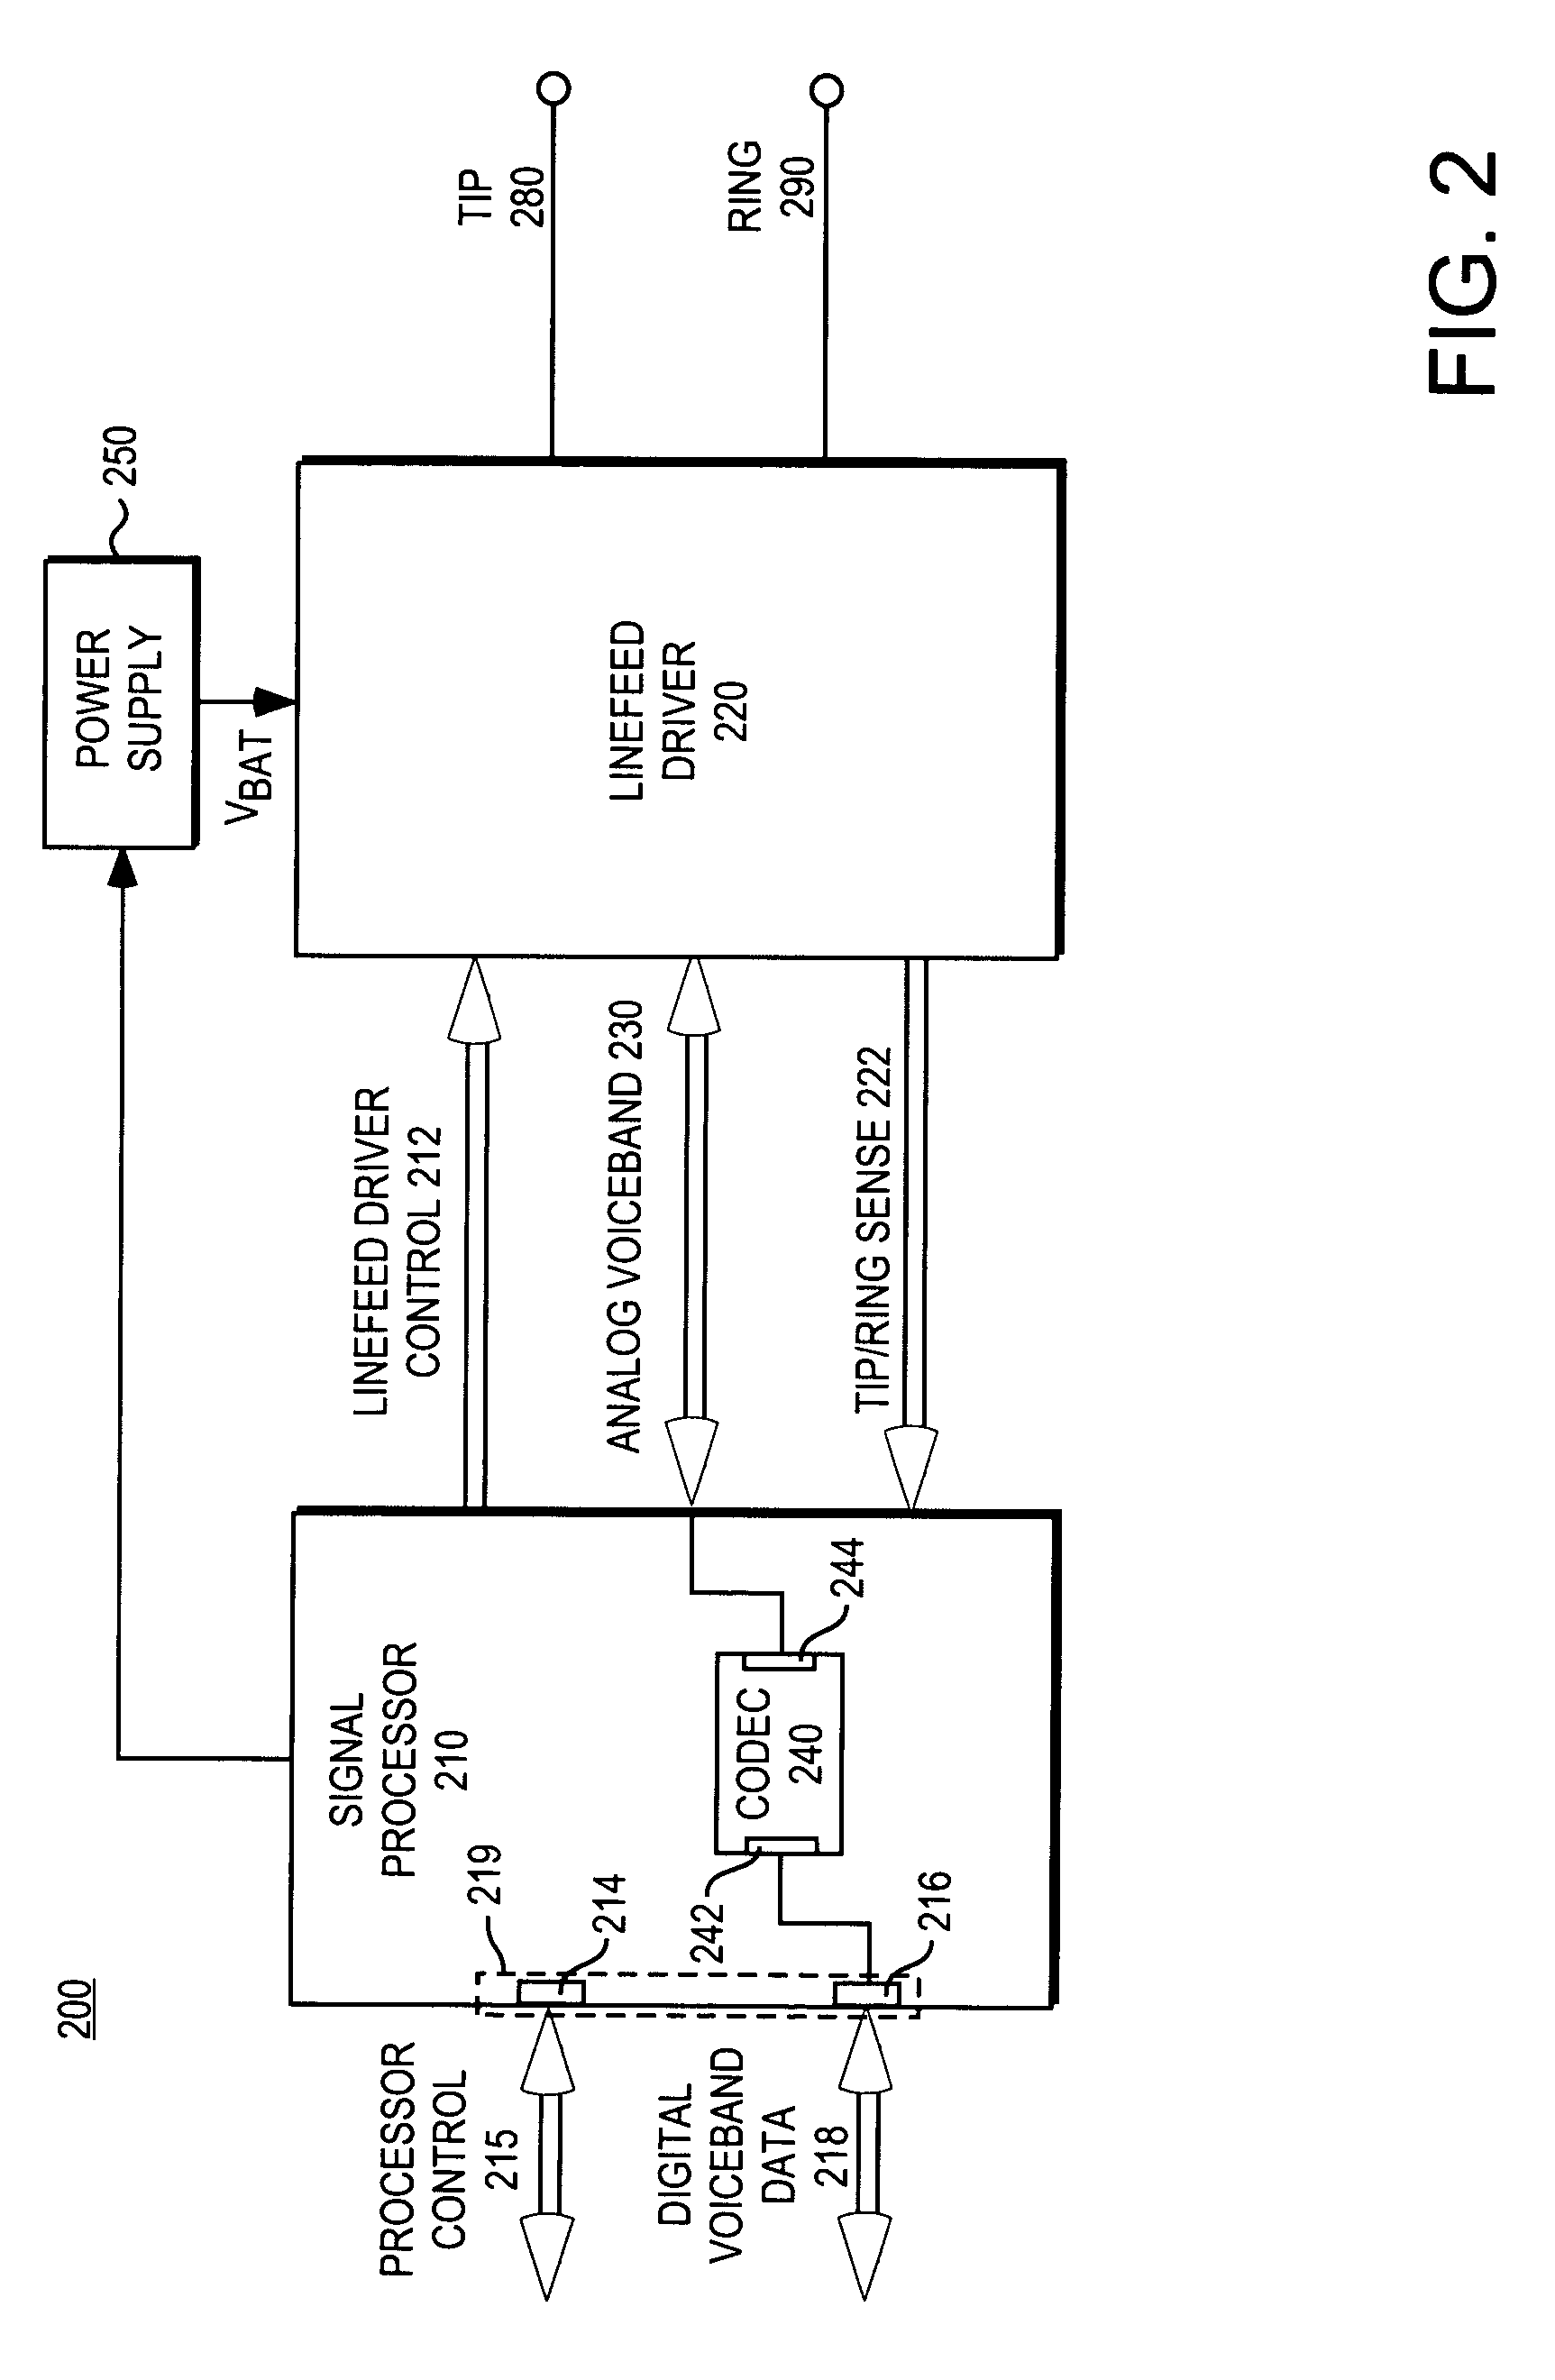 Direct drive for a subscriber line differential ringing signal